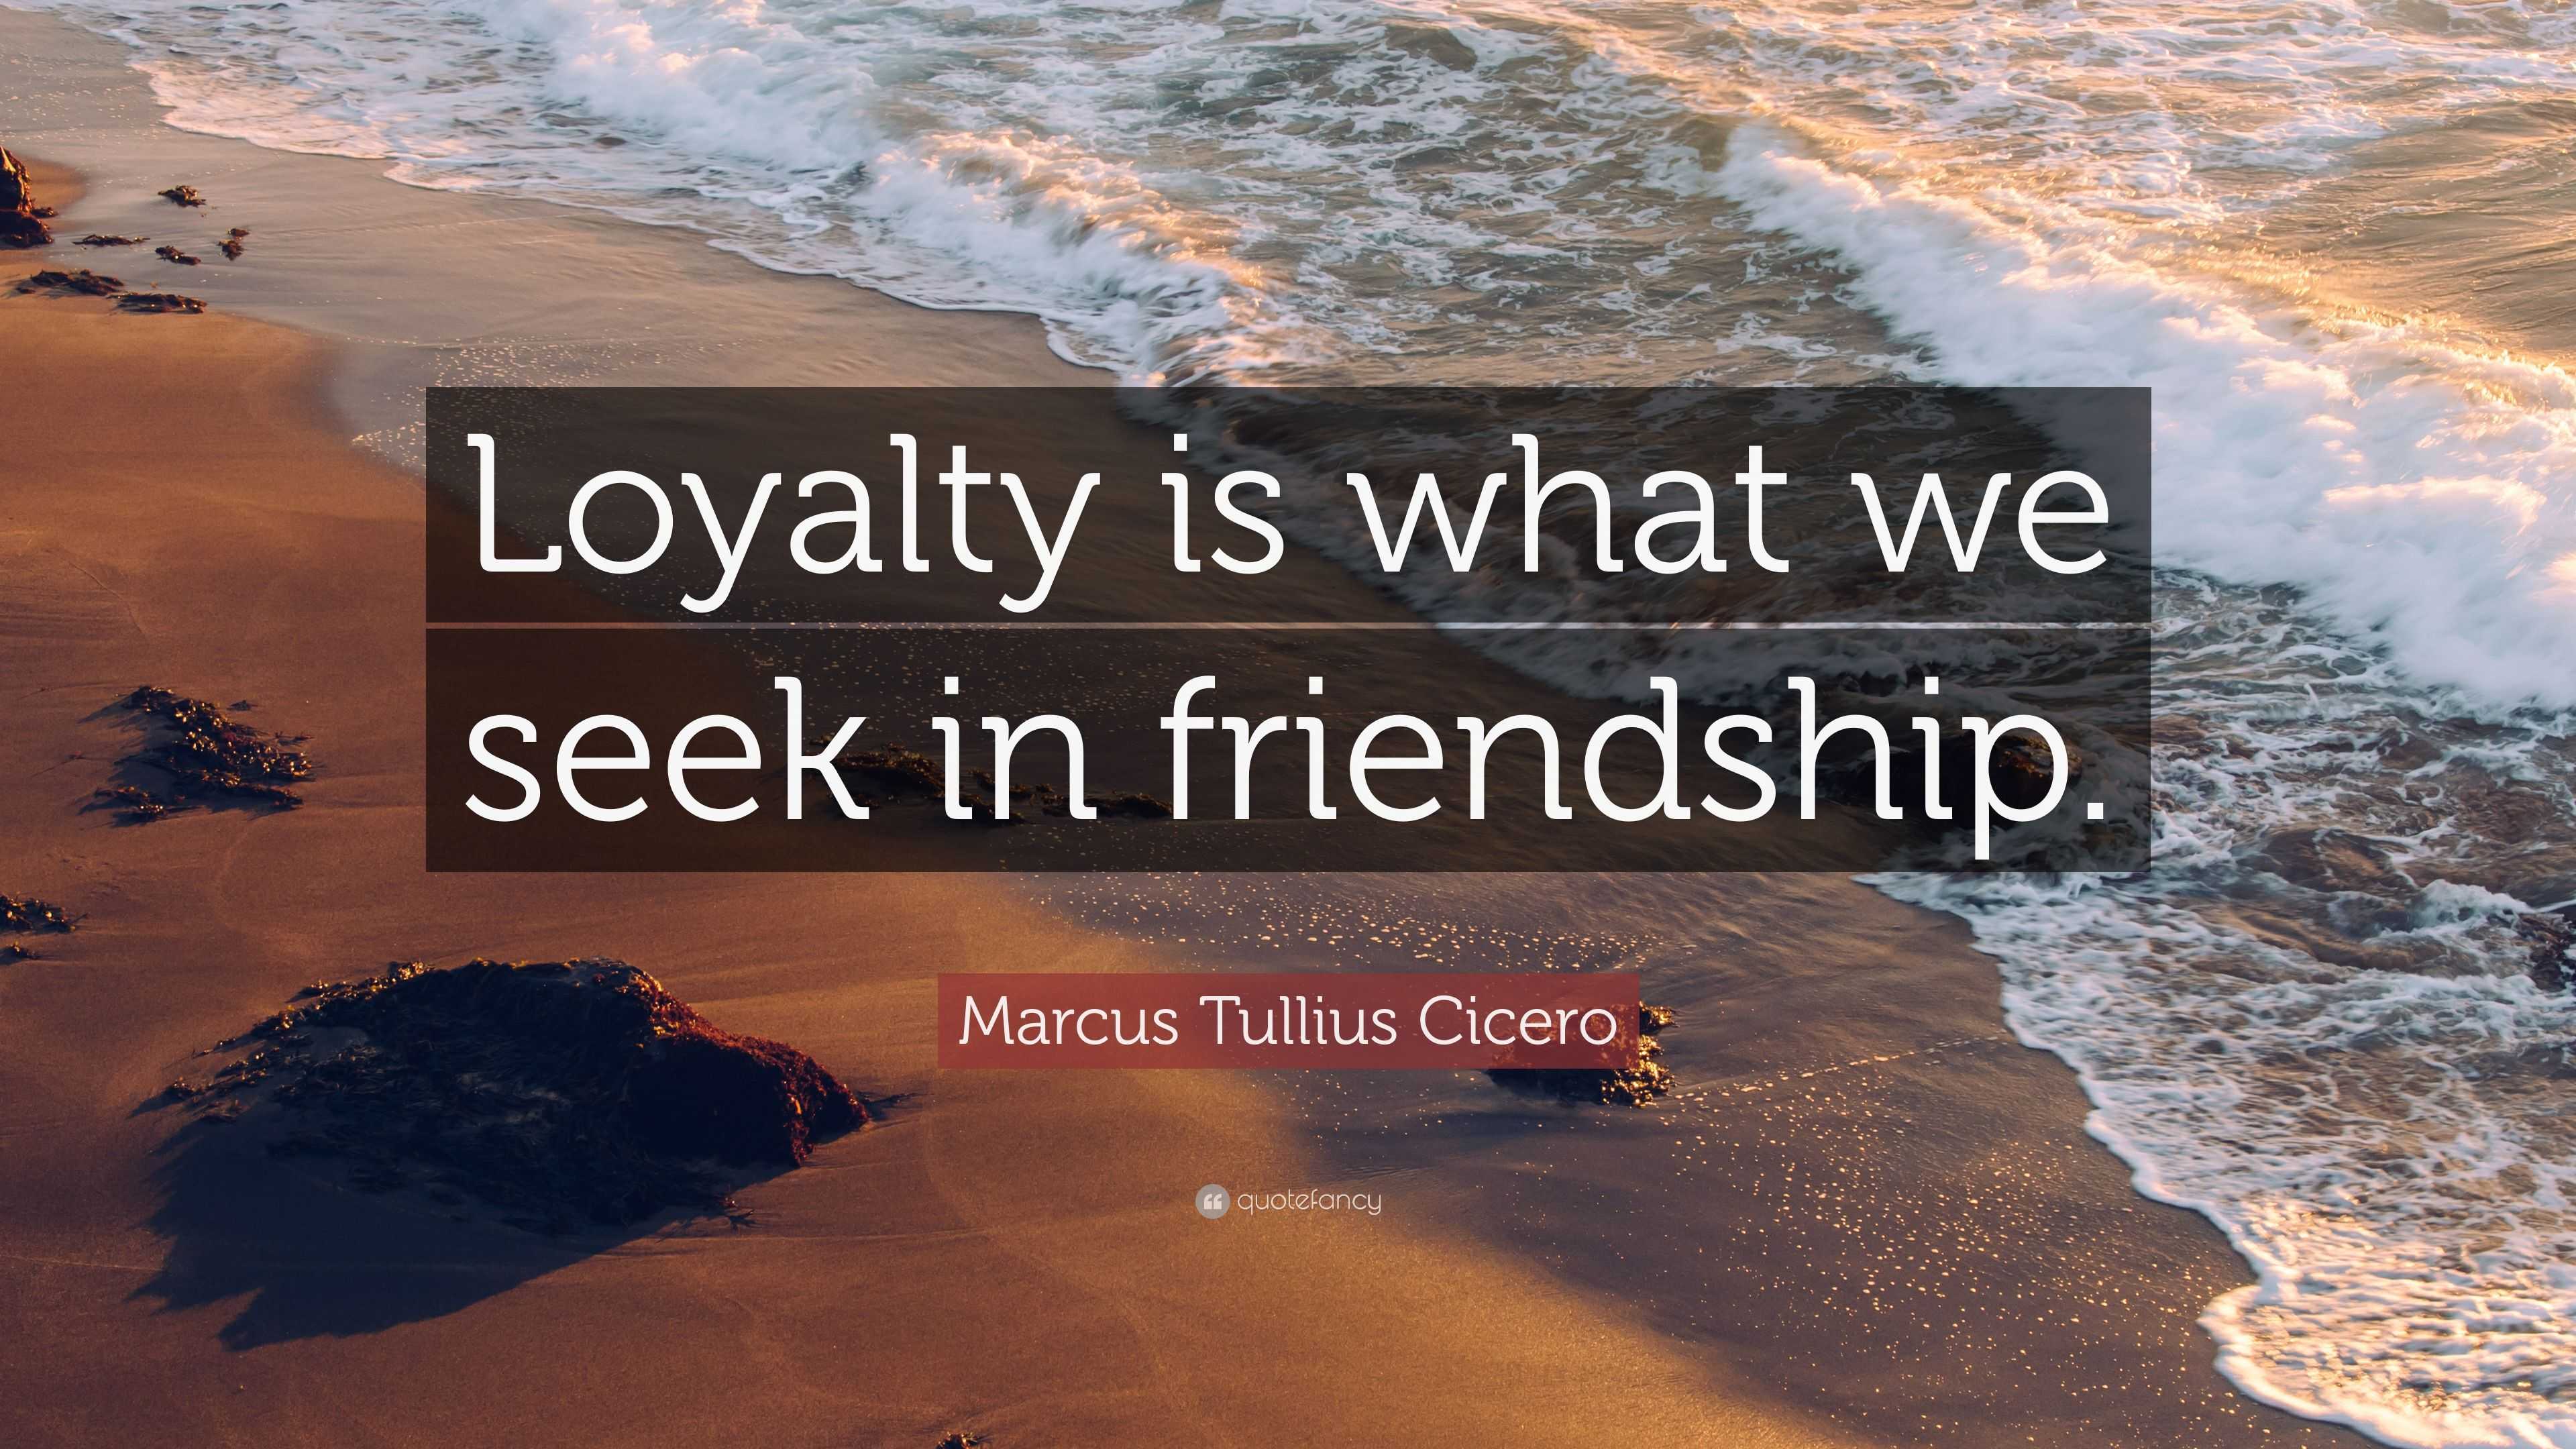 4759054 Marcus Tullius Cicero Quote Loyalty Is What We Seek In Friendship 